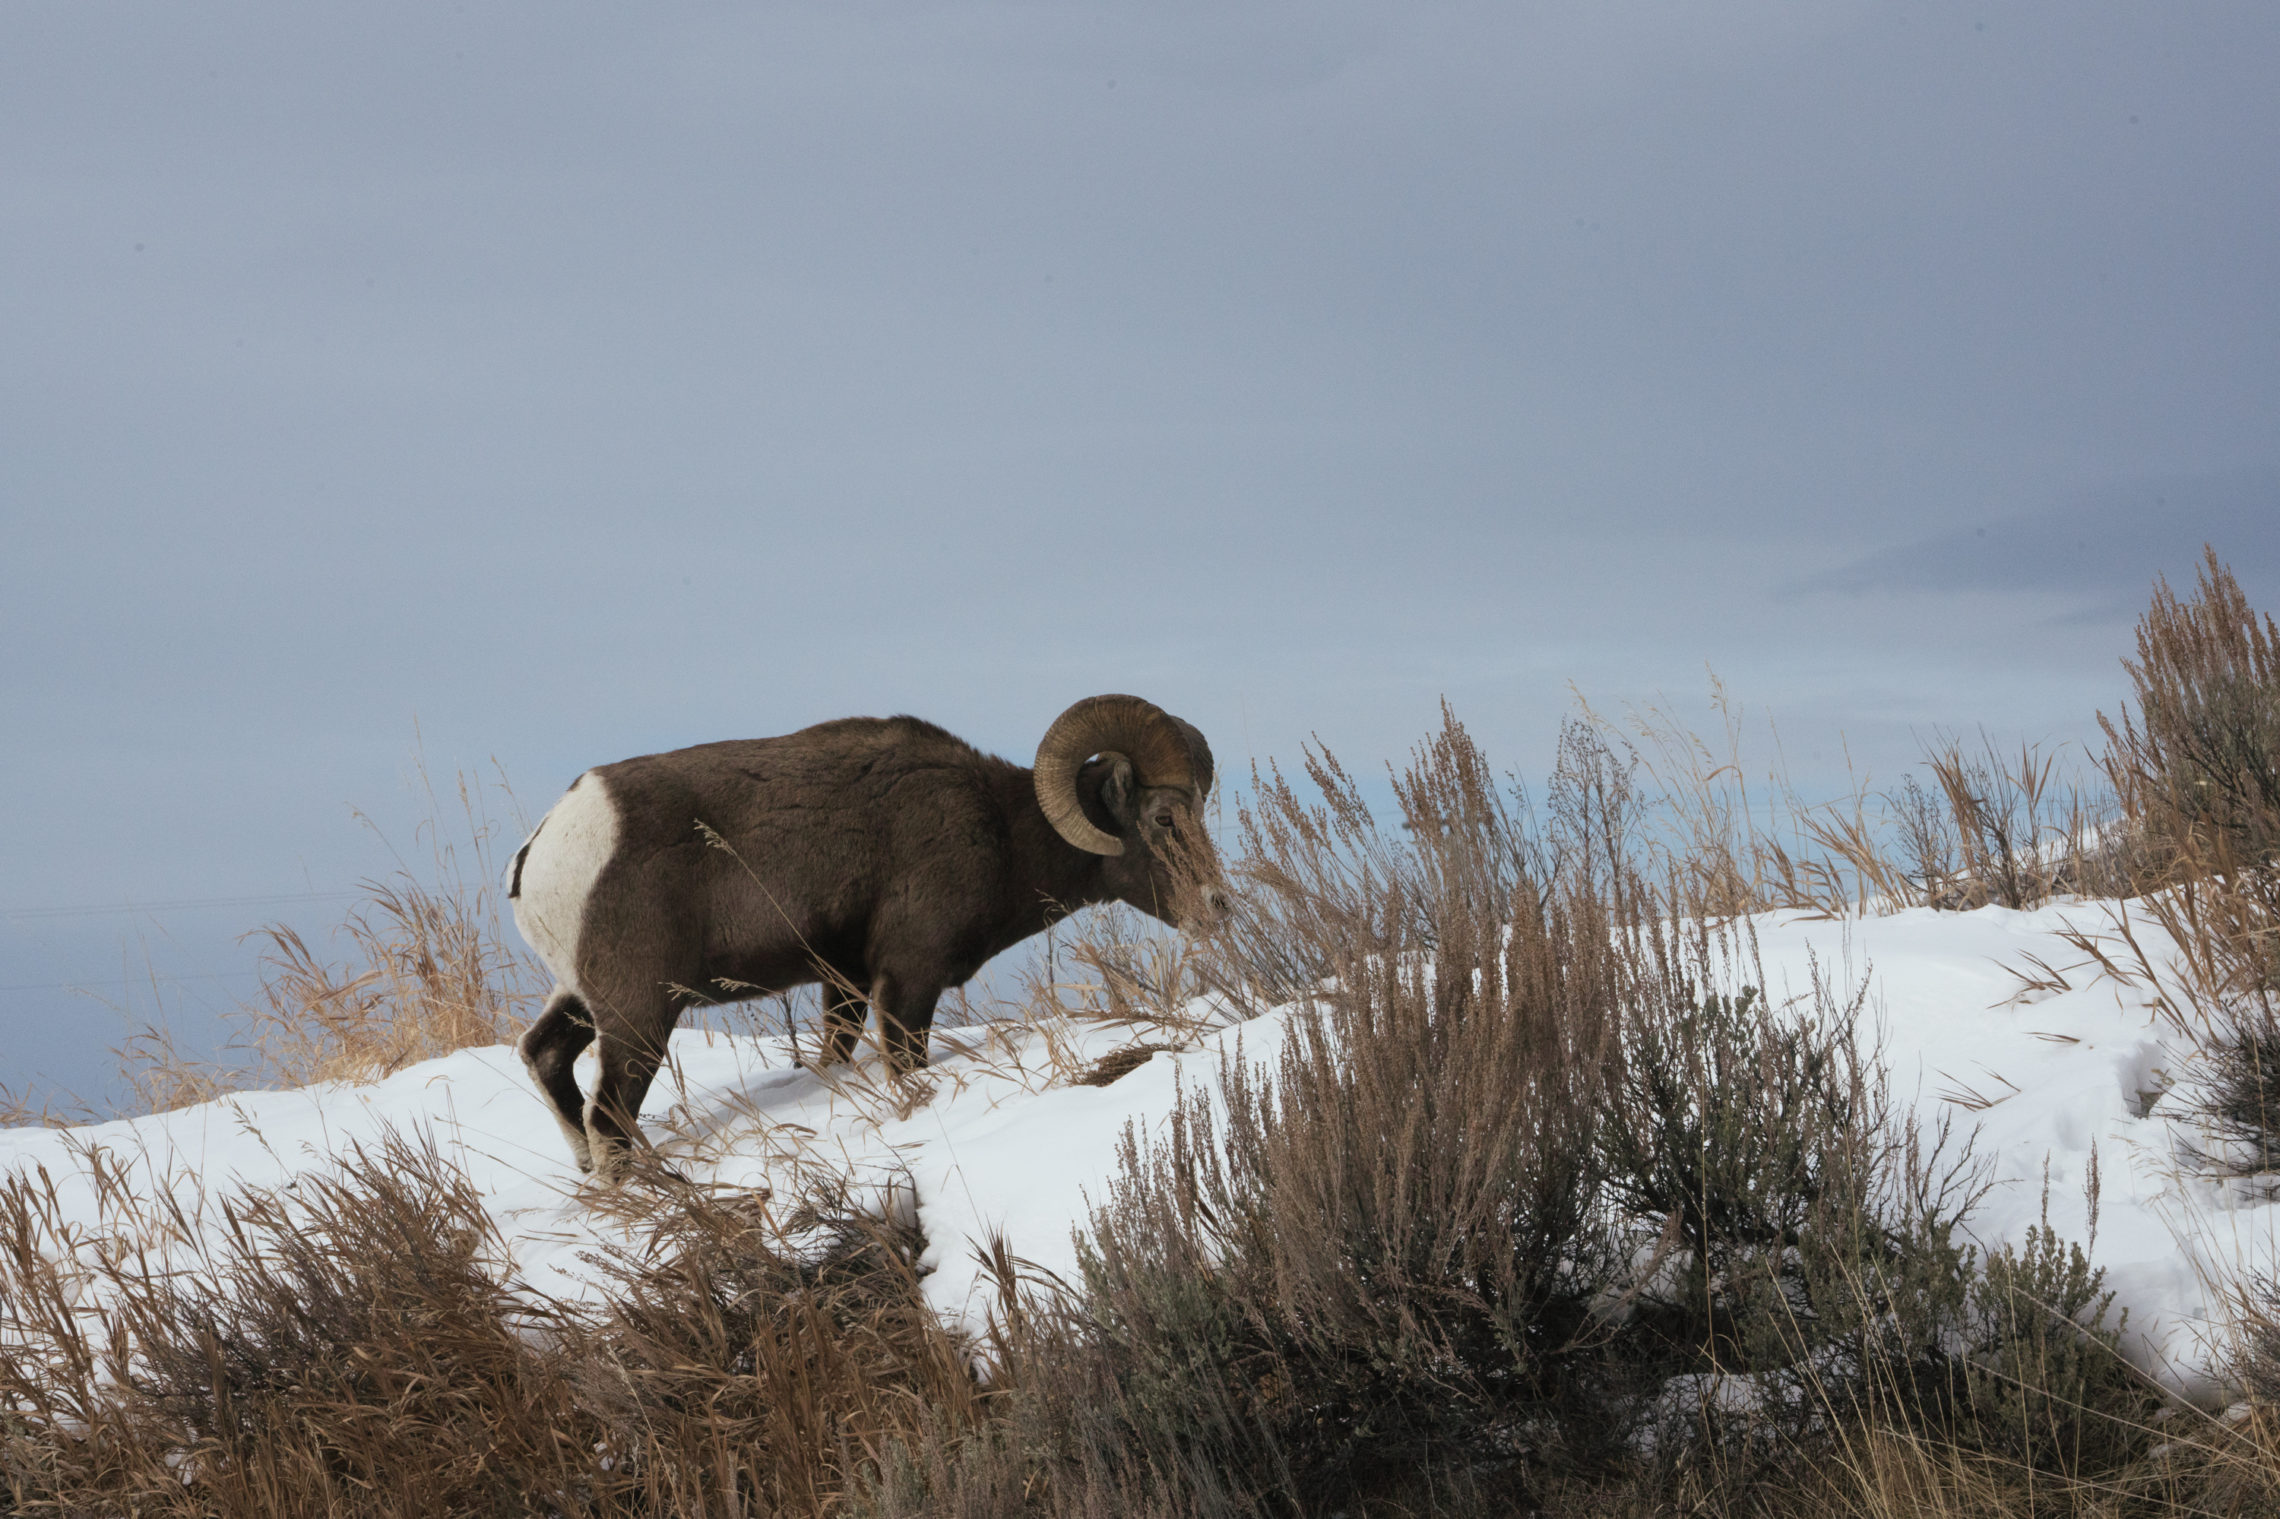 Just outside of Yellowstone National Park a bighorn sheep walks through the snow after nibbling salt from the highway. CREDIT: CLAIRE HARBAGE/NPR